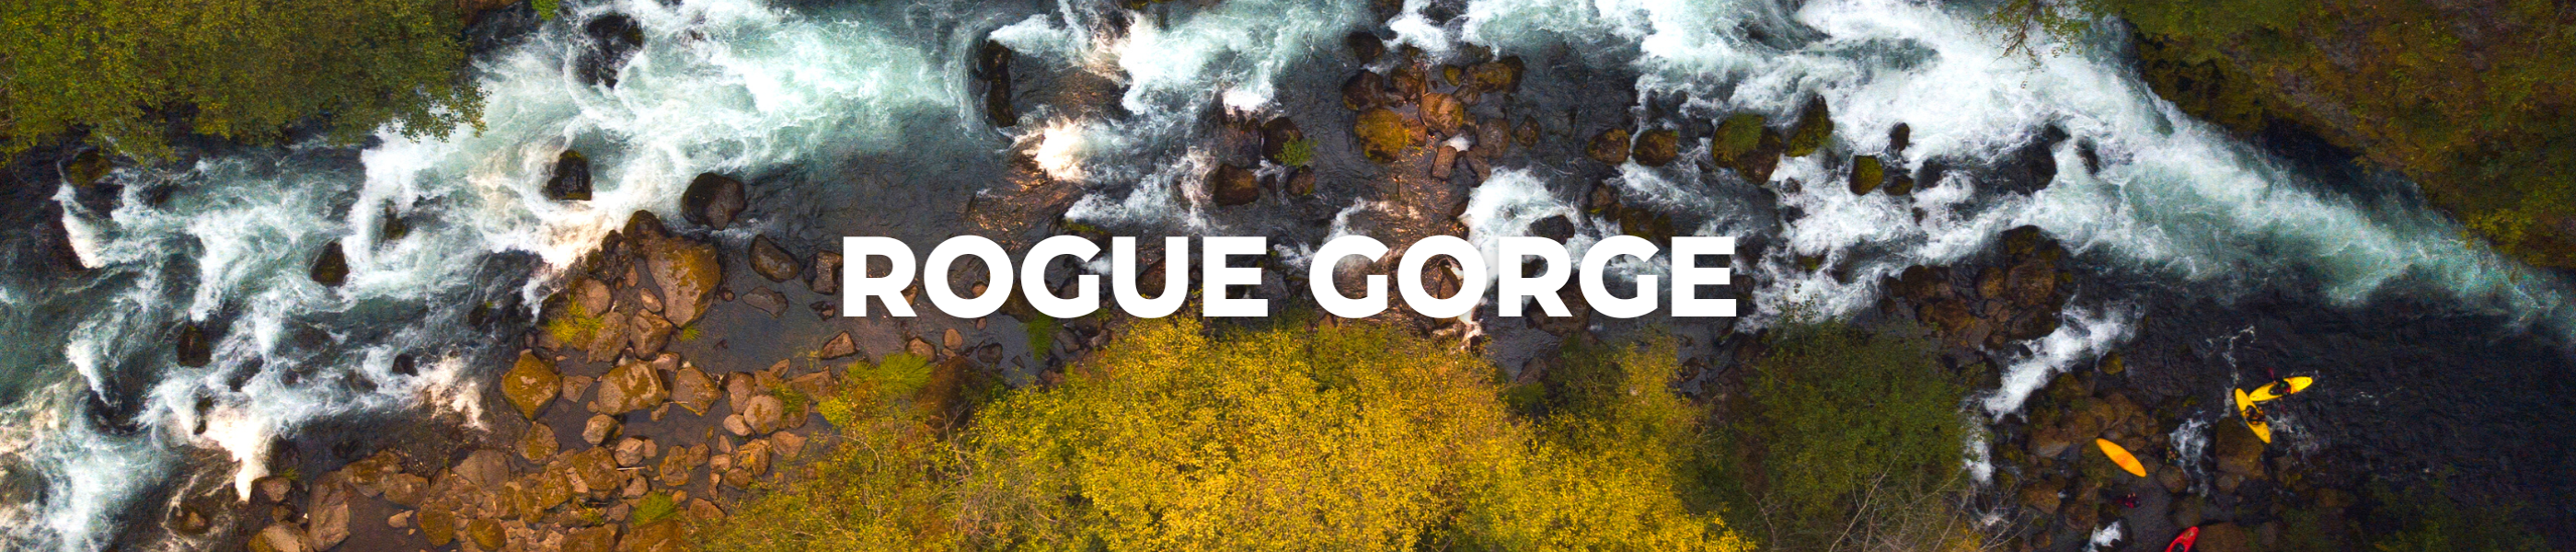 Rogue Umpqua Scenic Byway, Rogue Gorge, things to do in Medford, favorite trails, hiking and biking spots in Medford, kayaking,